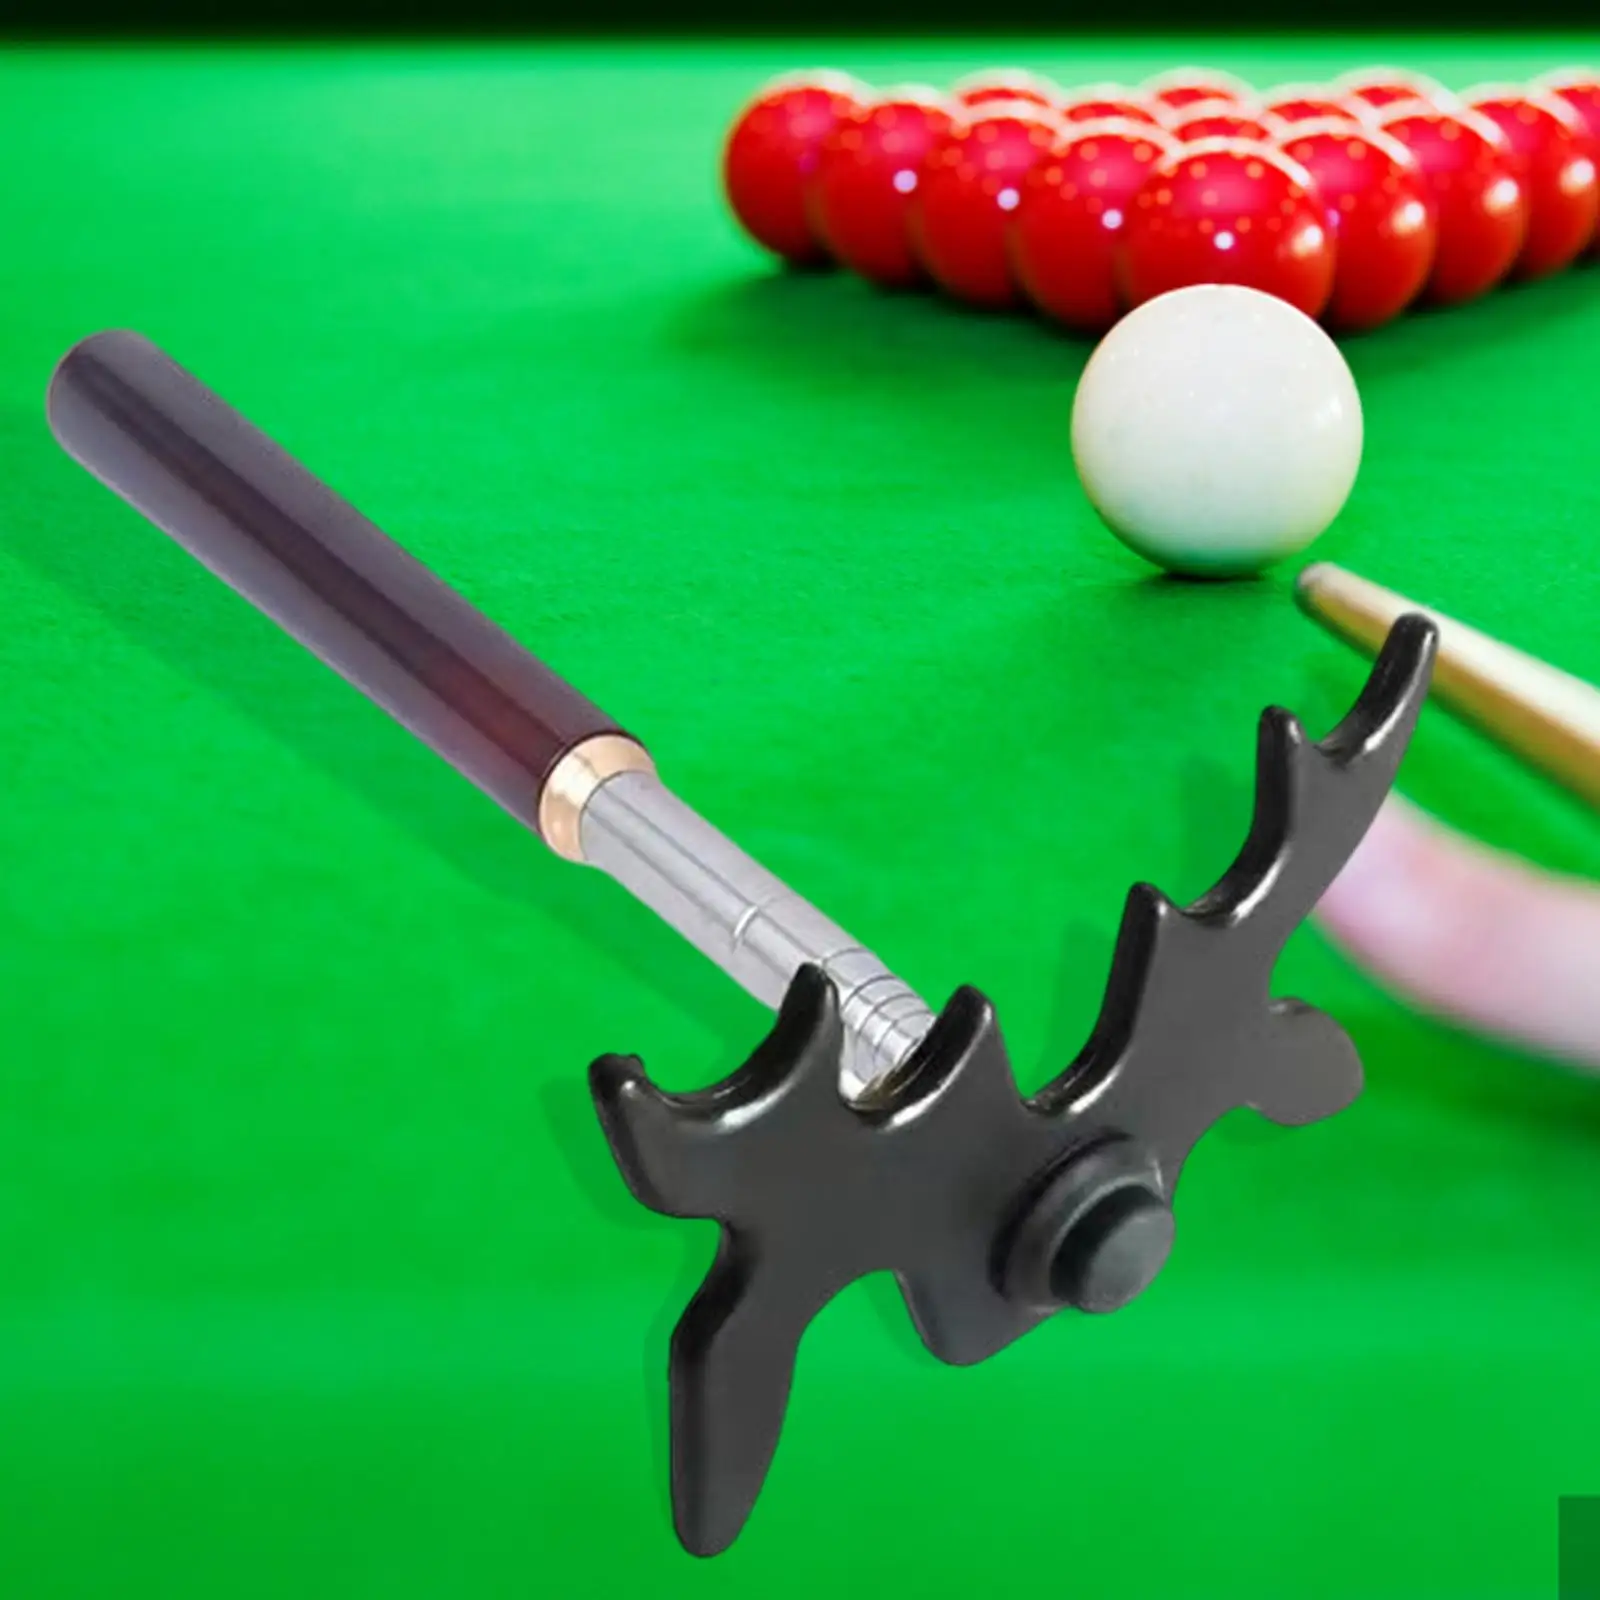 Billiards Cue Bridge with Removable Head Pool Table Accessories Cue Rest Telescoping Retractable Extendable Snooker Pool